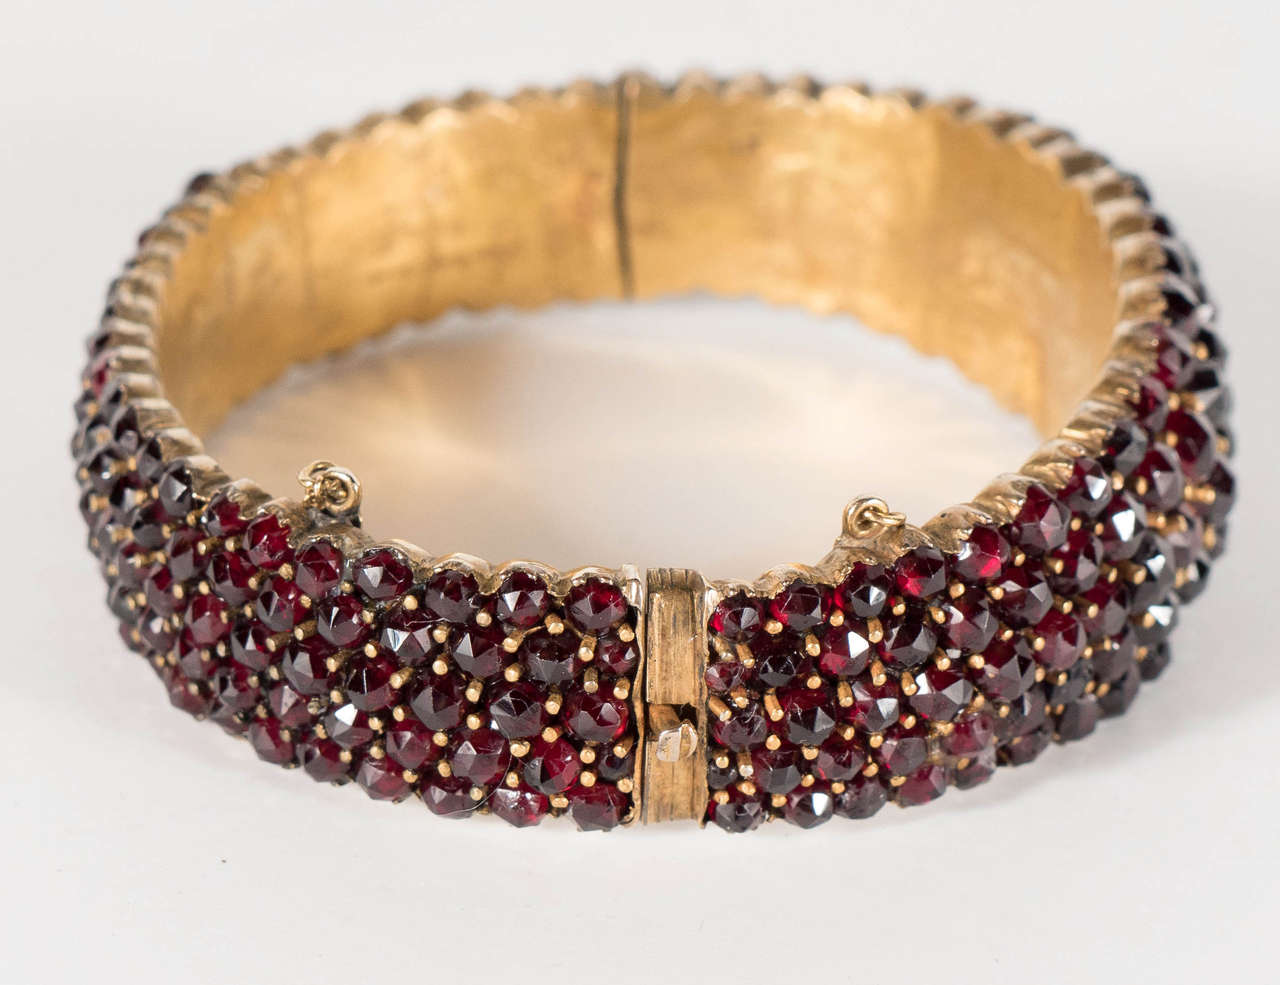 This stunning bracelet features 5 tiers of graduated garnets set in what is called garnet gold which is a sterling silver base washed is gold. It has a hinged bangle design that locks with a safety chain as well.